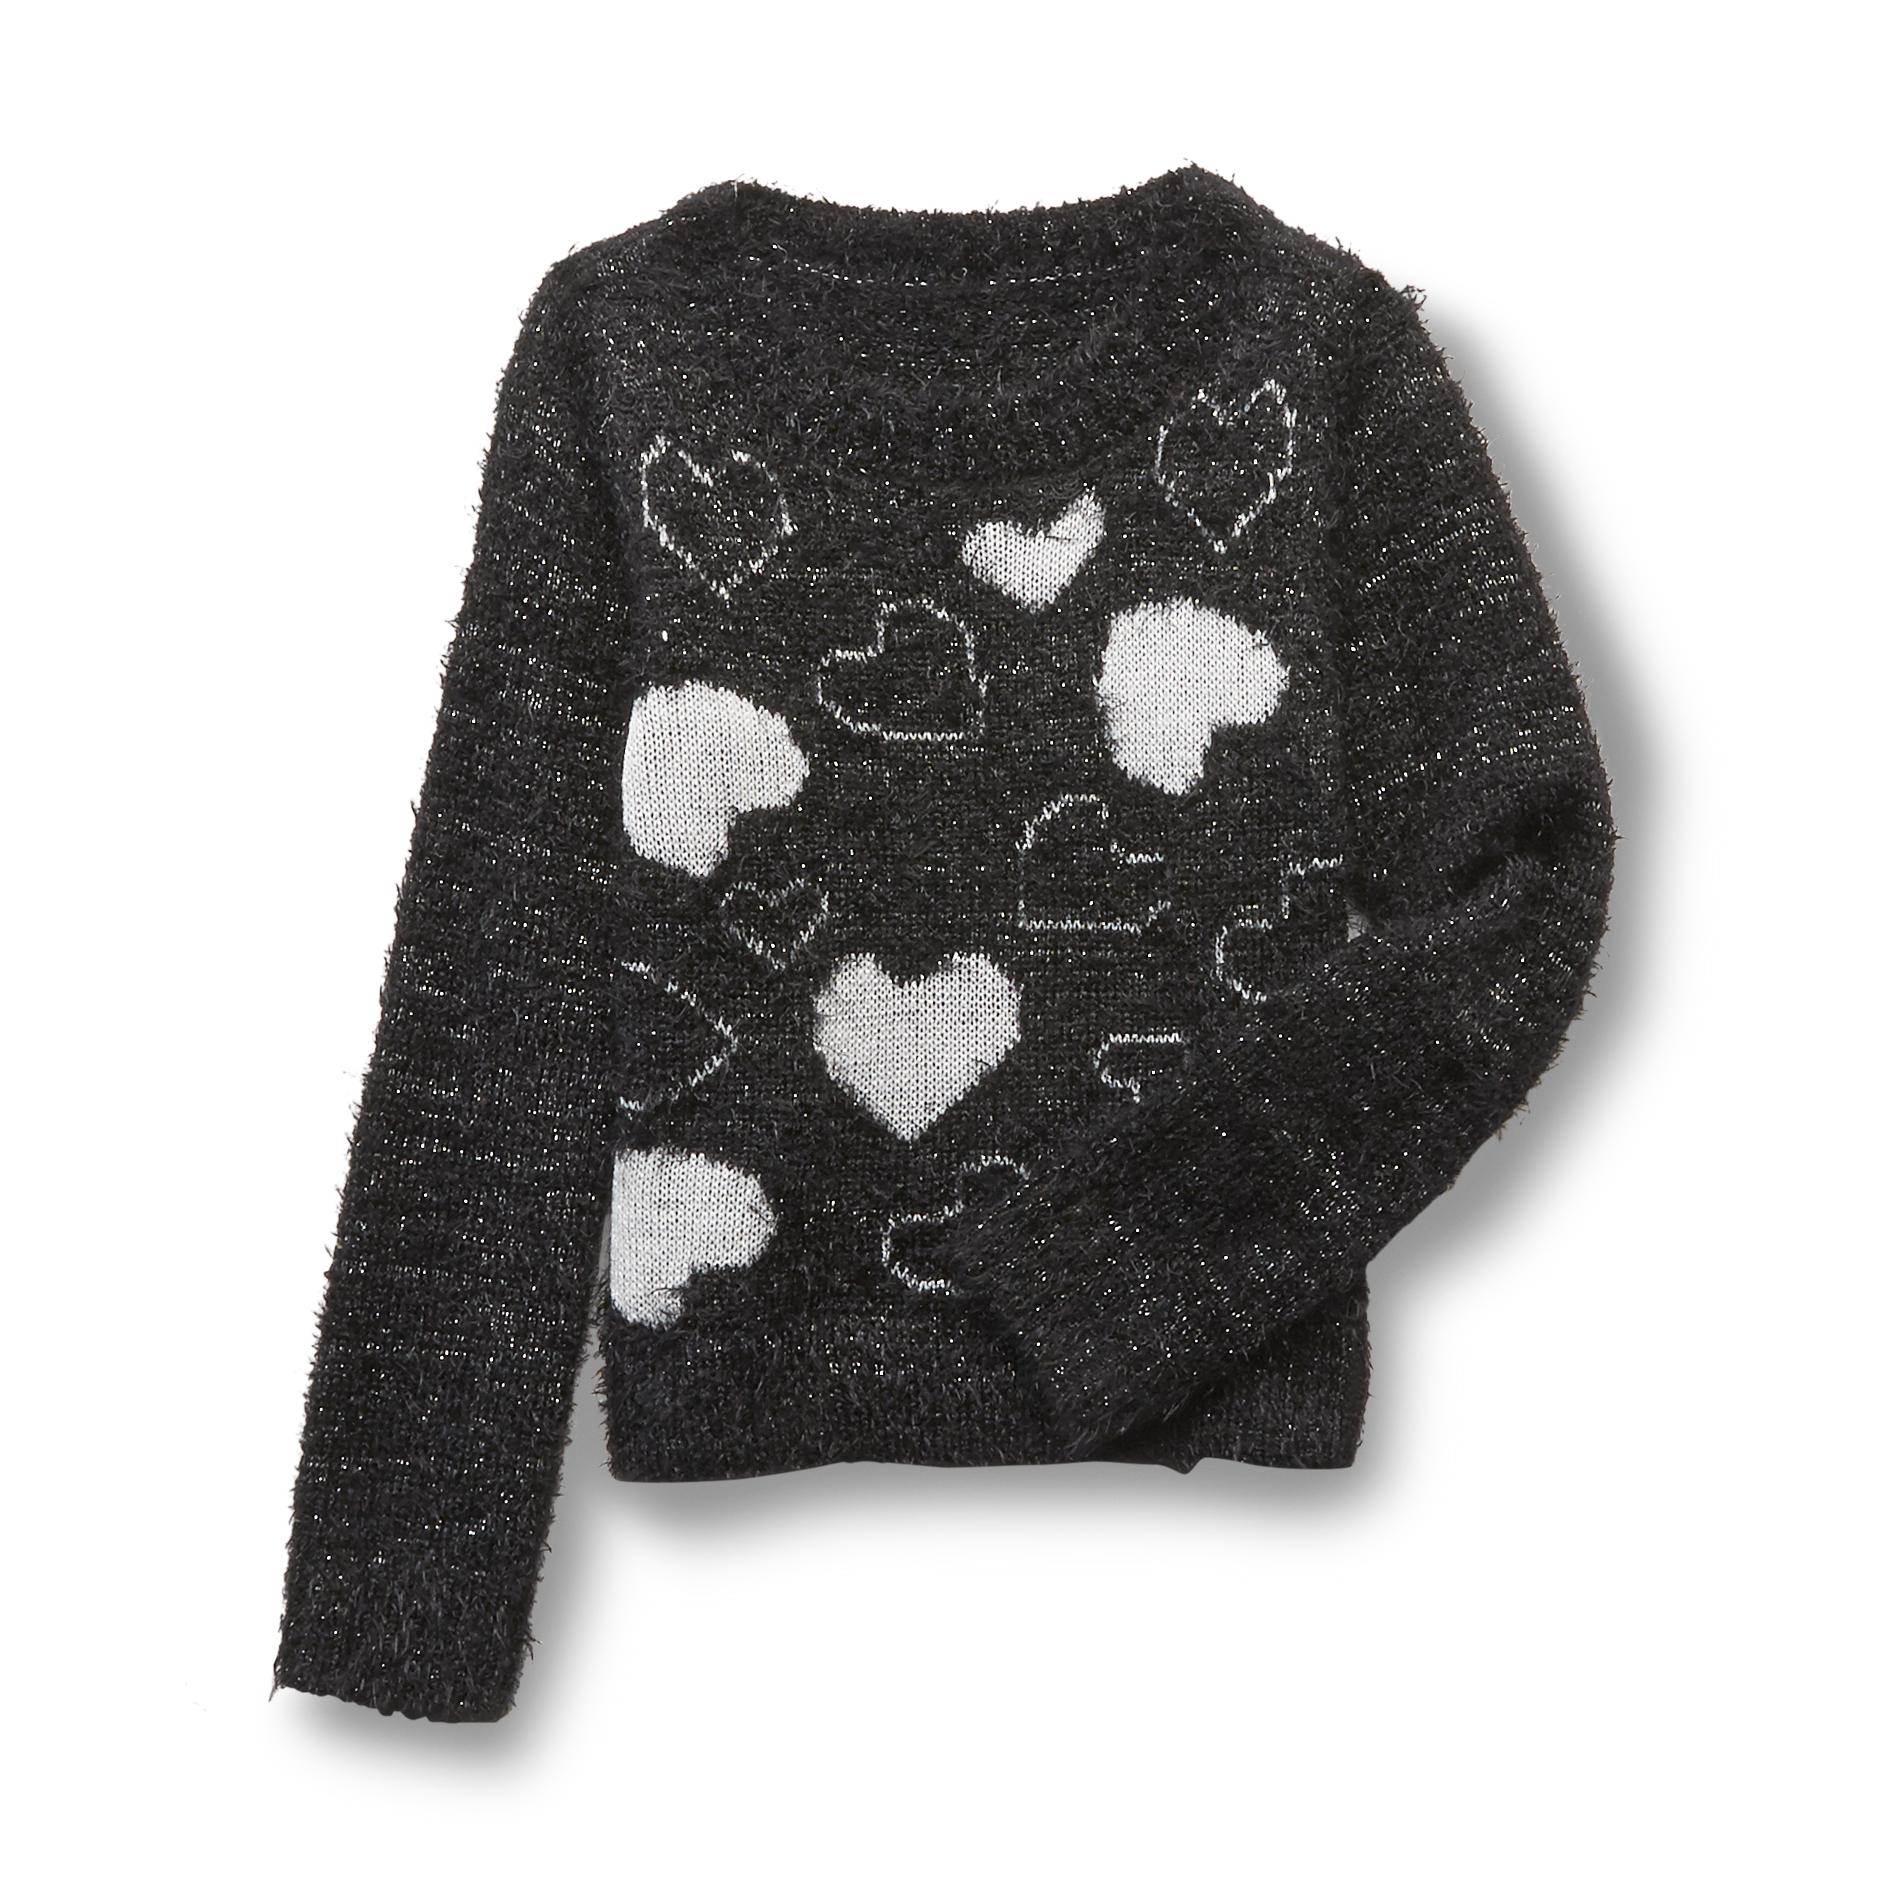 Piper Girl's Feathered Knit Sweater - Heart